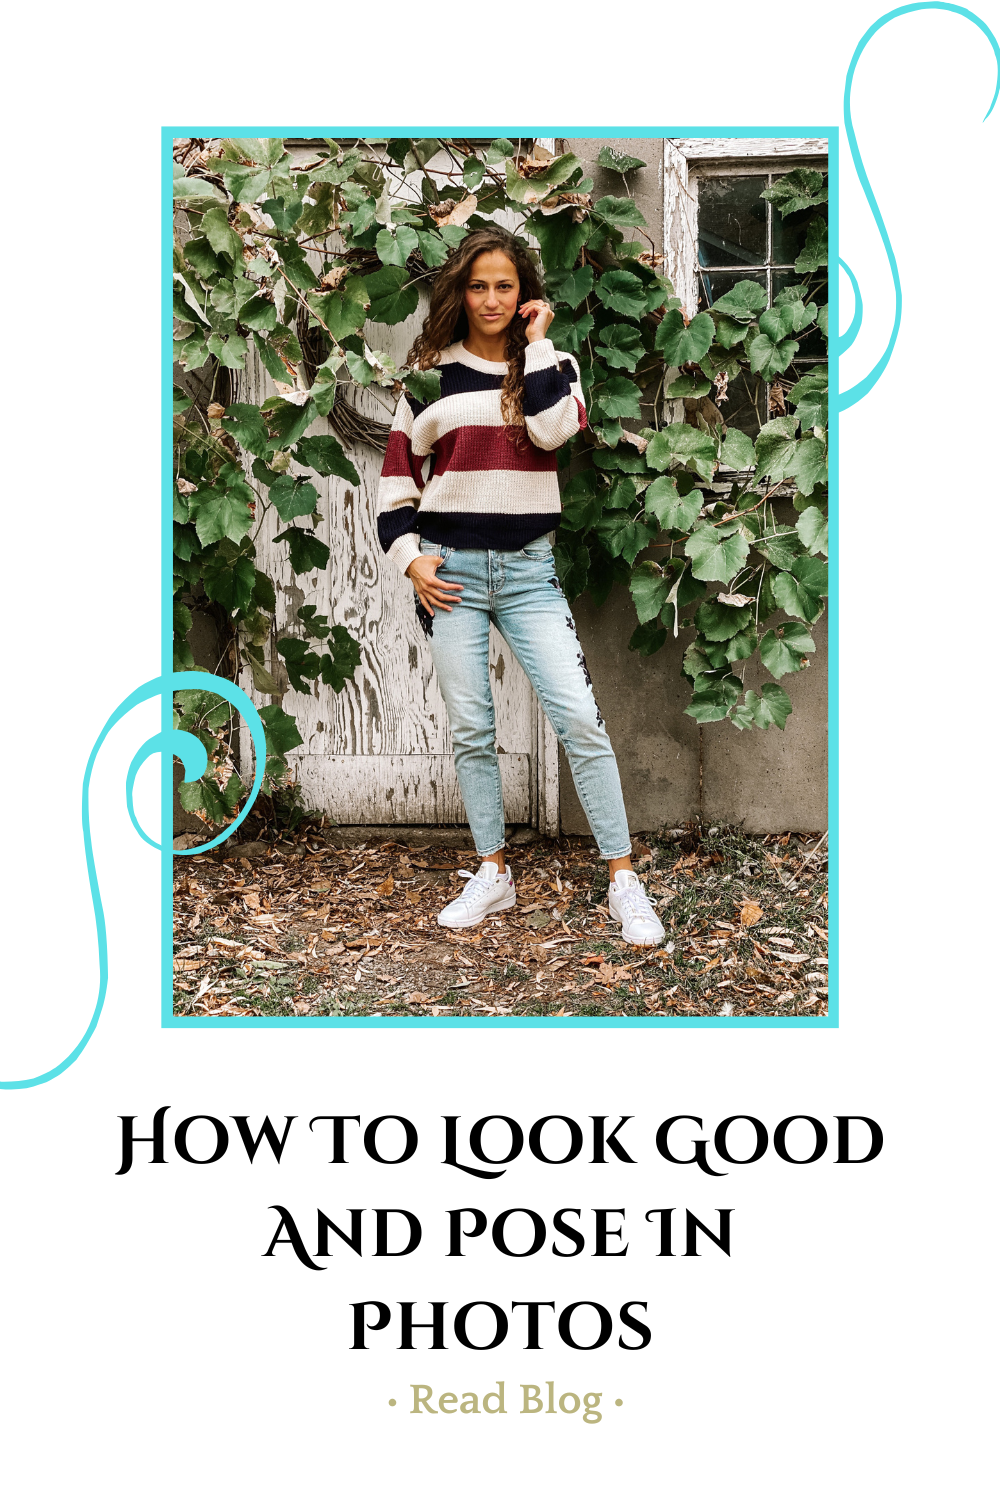 How To Pose And Look Good In Photos.JPG